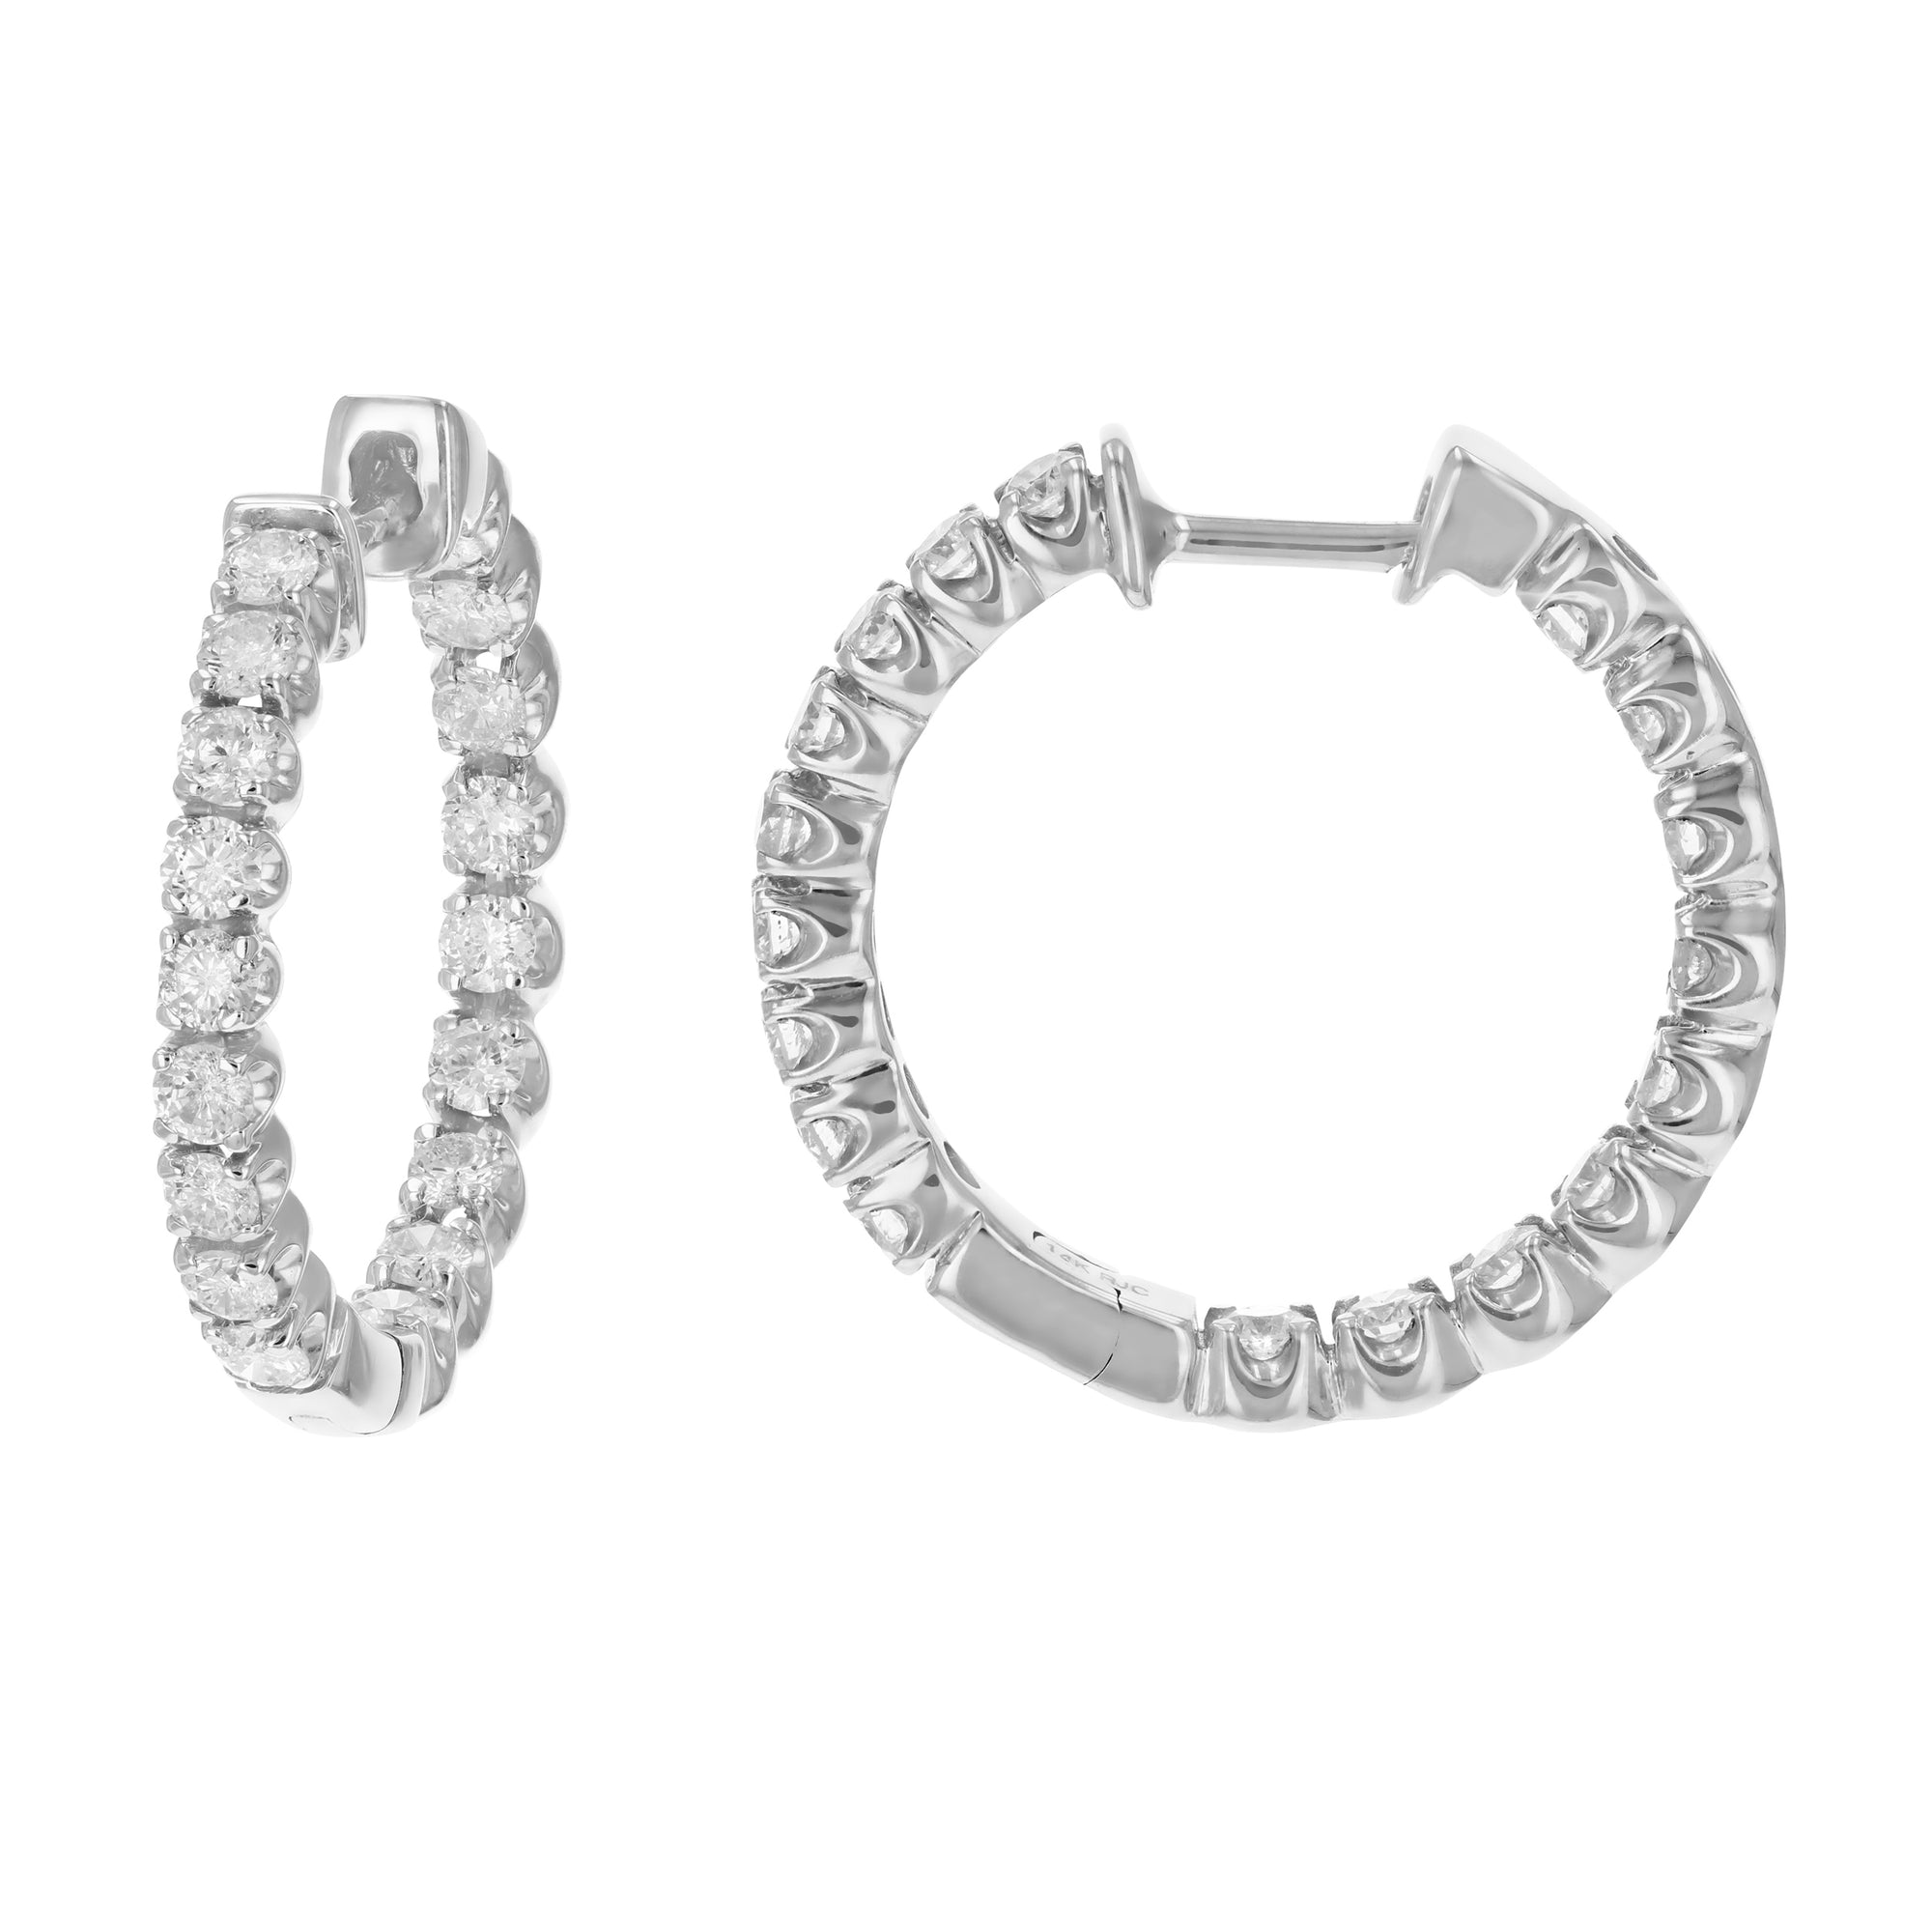 2 cttw SI2-I1 Clarity Certified 14K White Gold Diamond Hoop Earrings G-H Color